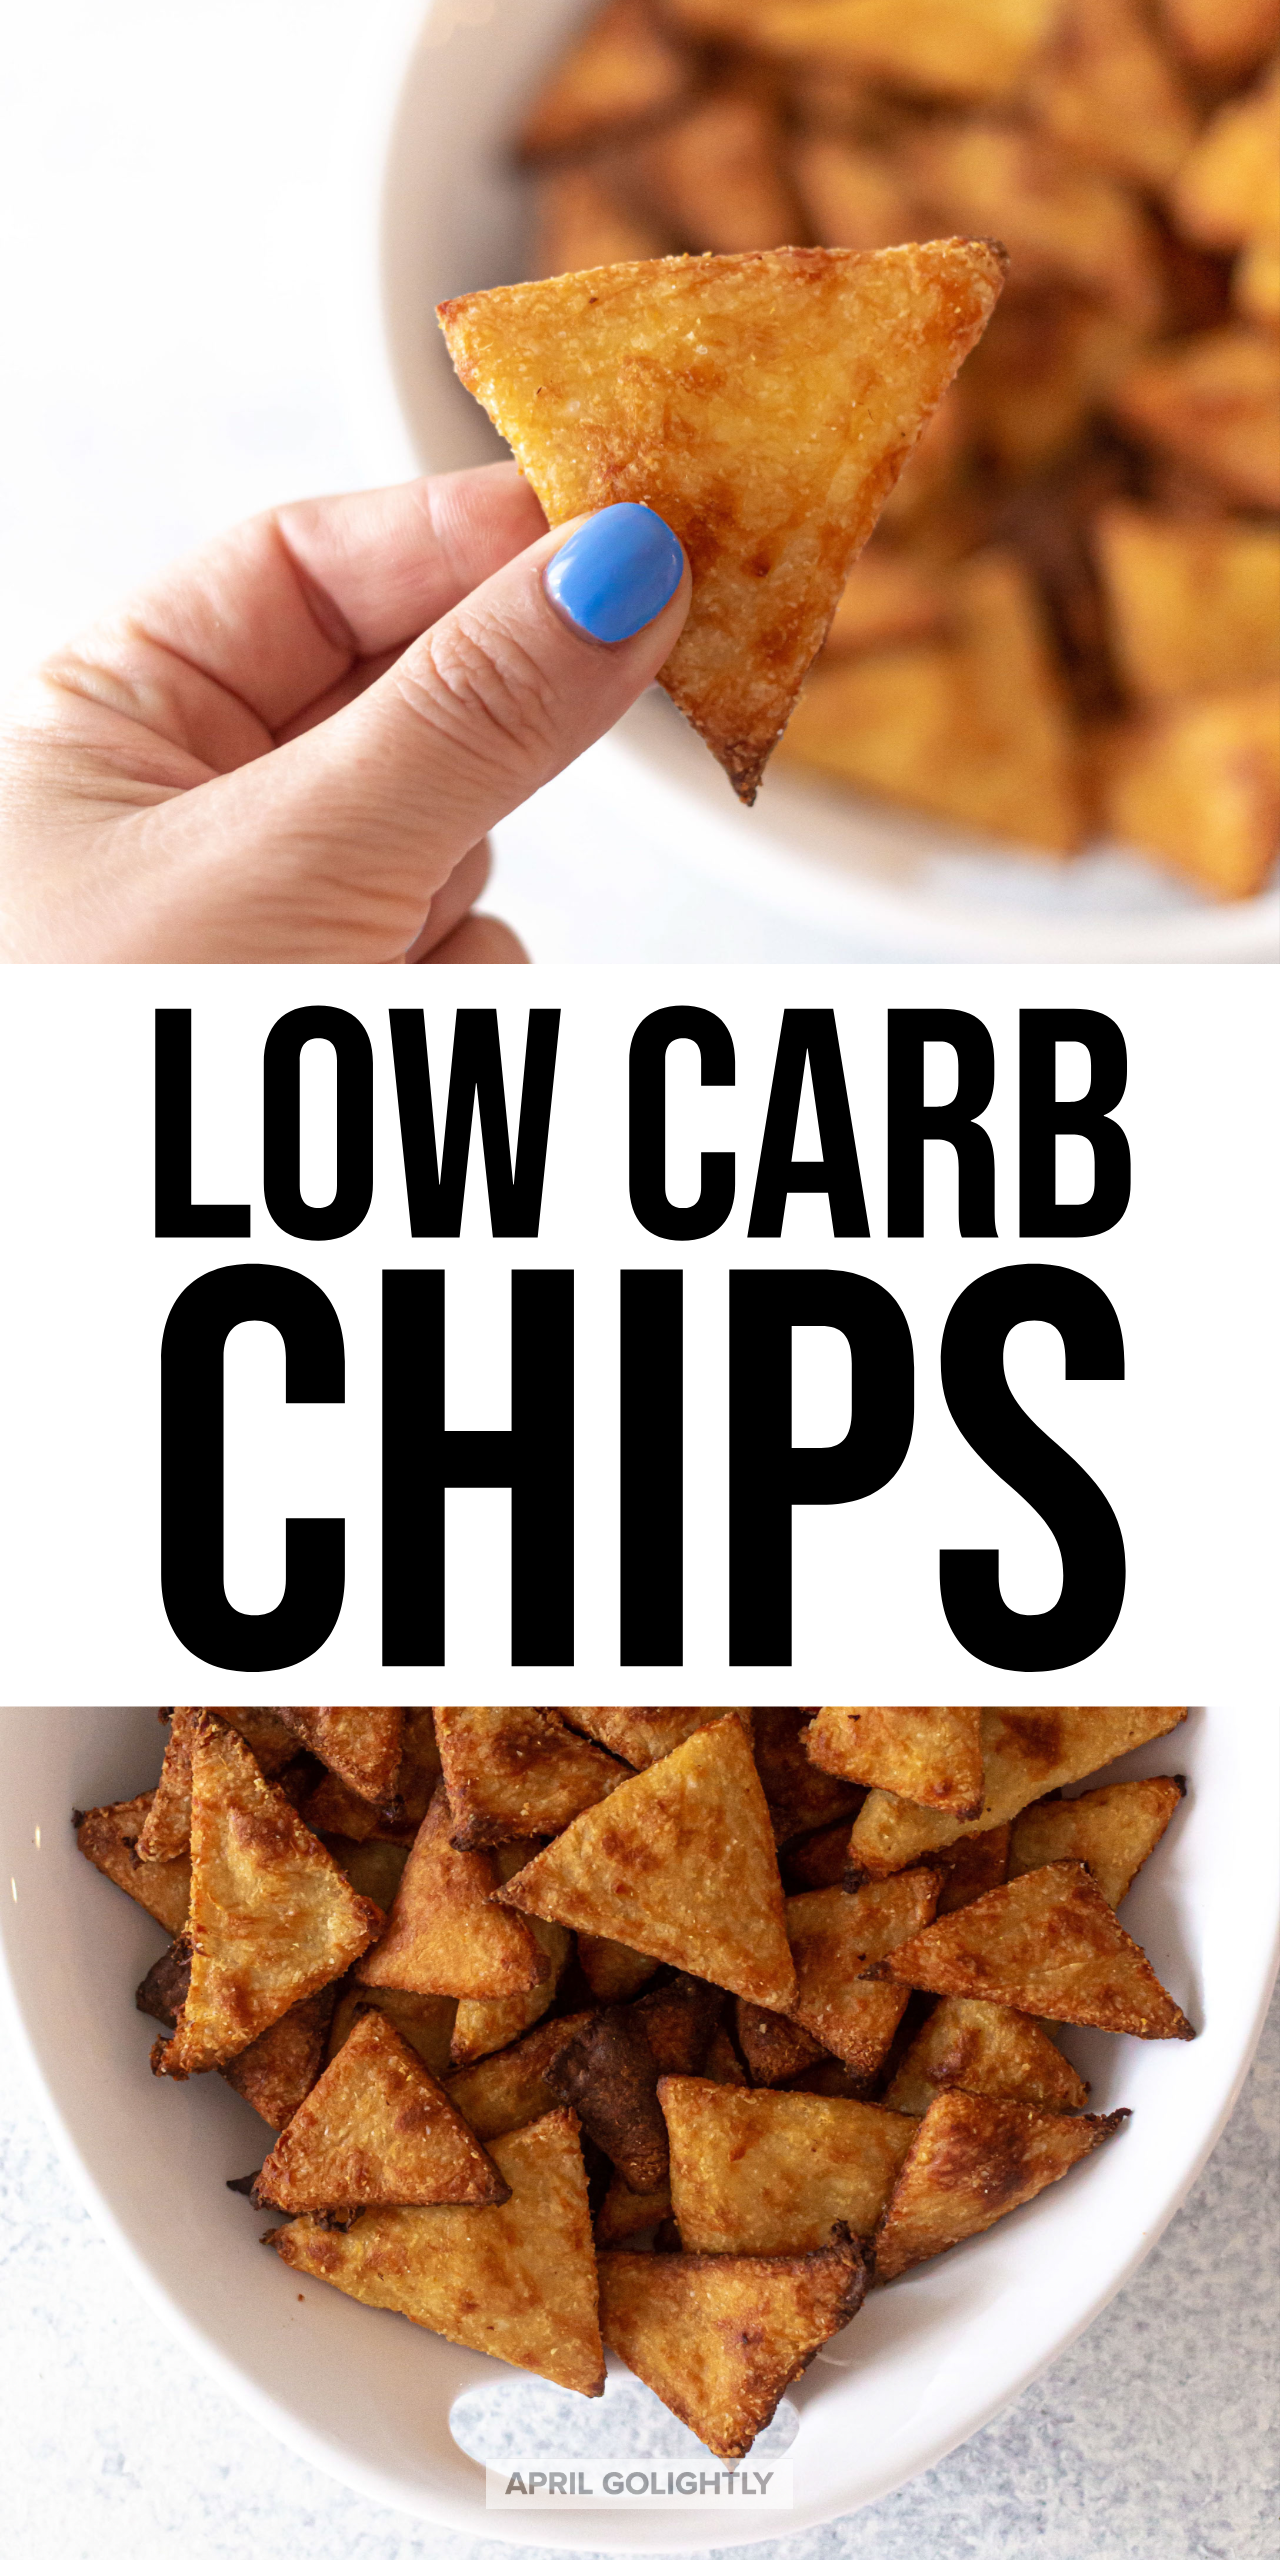 Low Carb chips recipe 